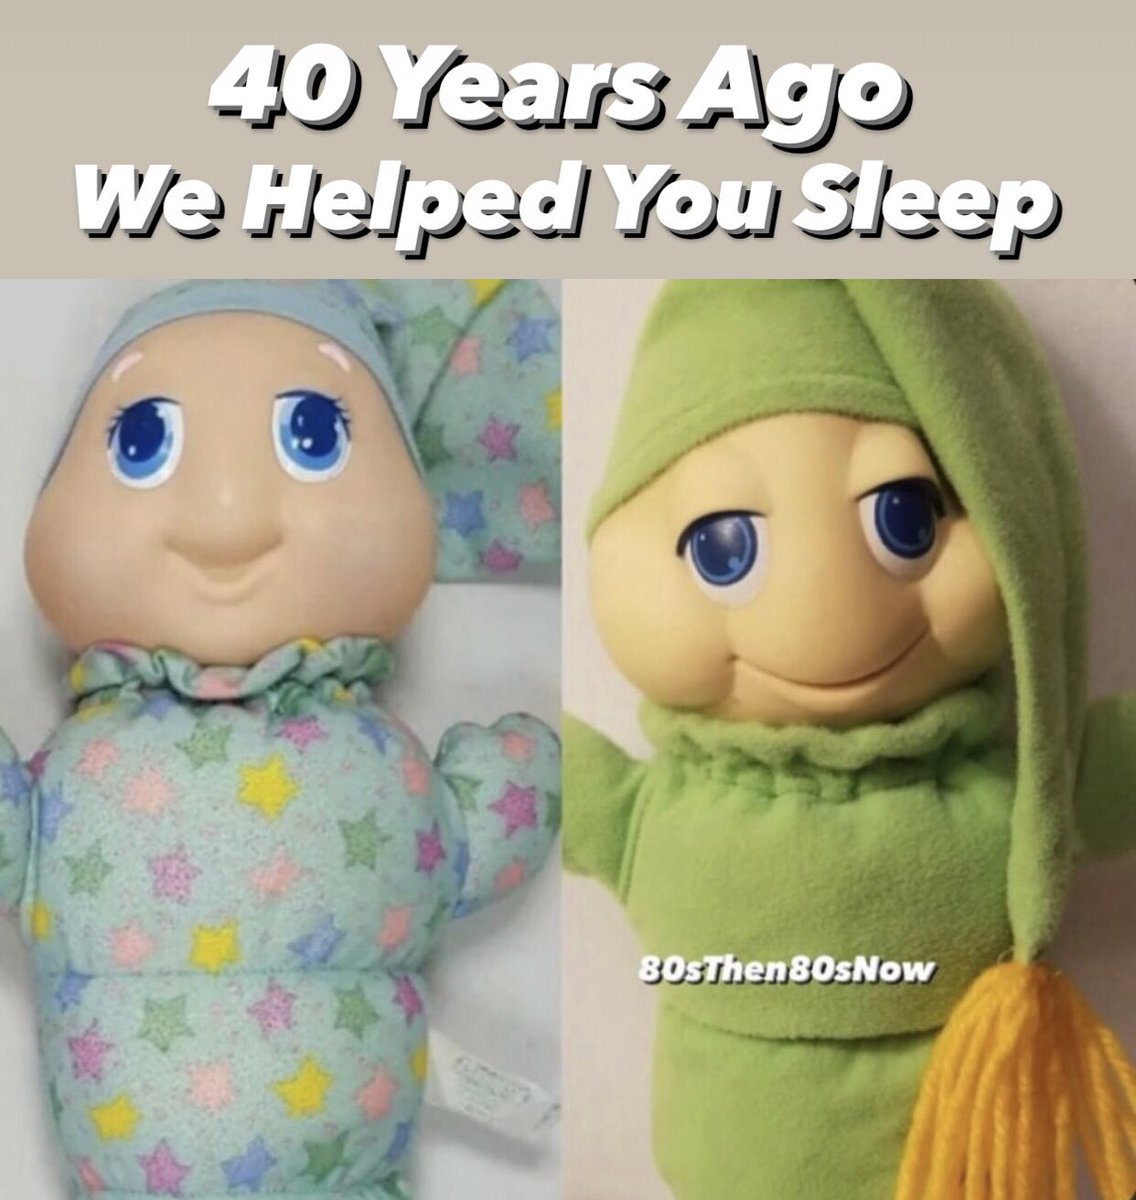 Our Light Scared Away All Your Monsters. You’re Welcome. #GloWorm #GloFriends #Childhood #Nostalgia #Retro #BedTime #NightLight #1980s #80s #80sThen80sNow